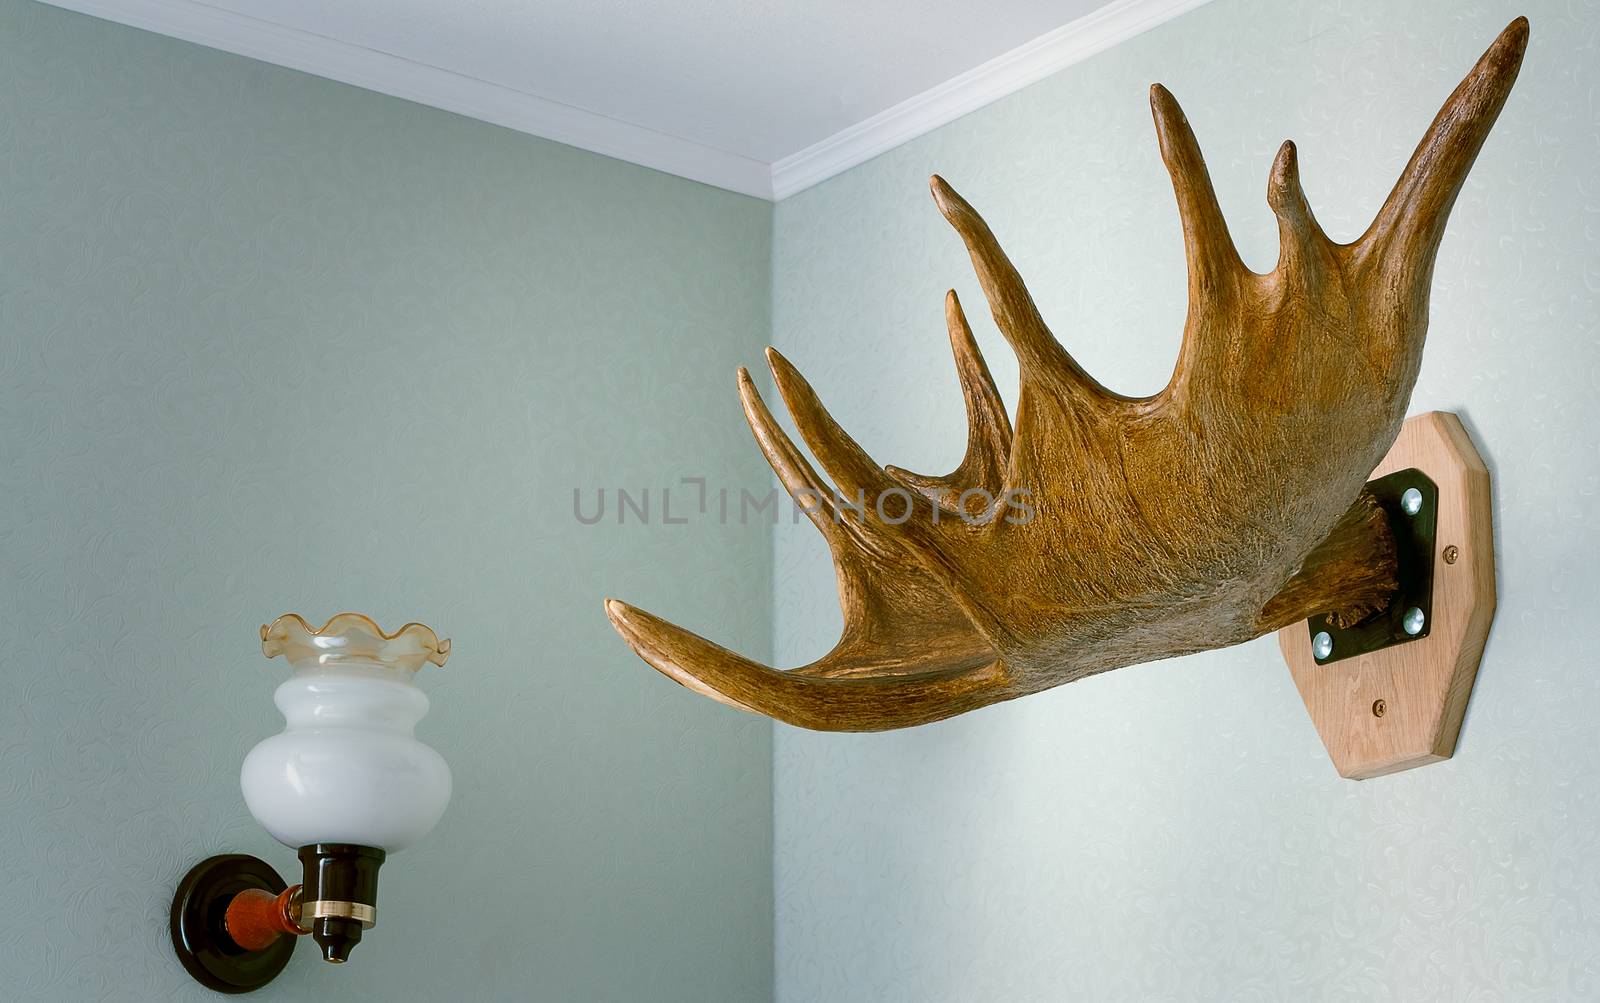 Trophy of the hunter - a horn of an elk. It is presented as an i by georgina198